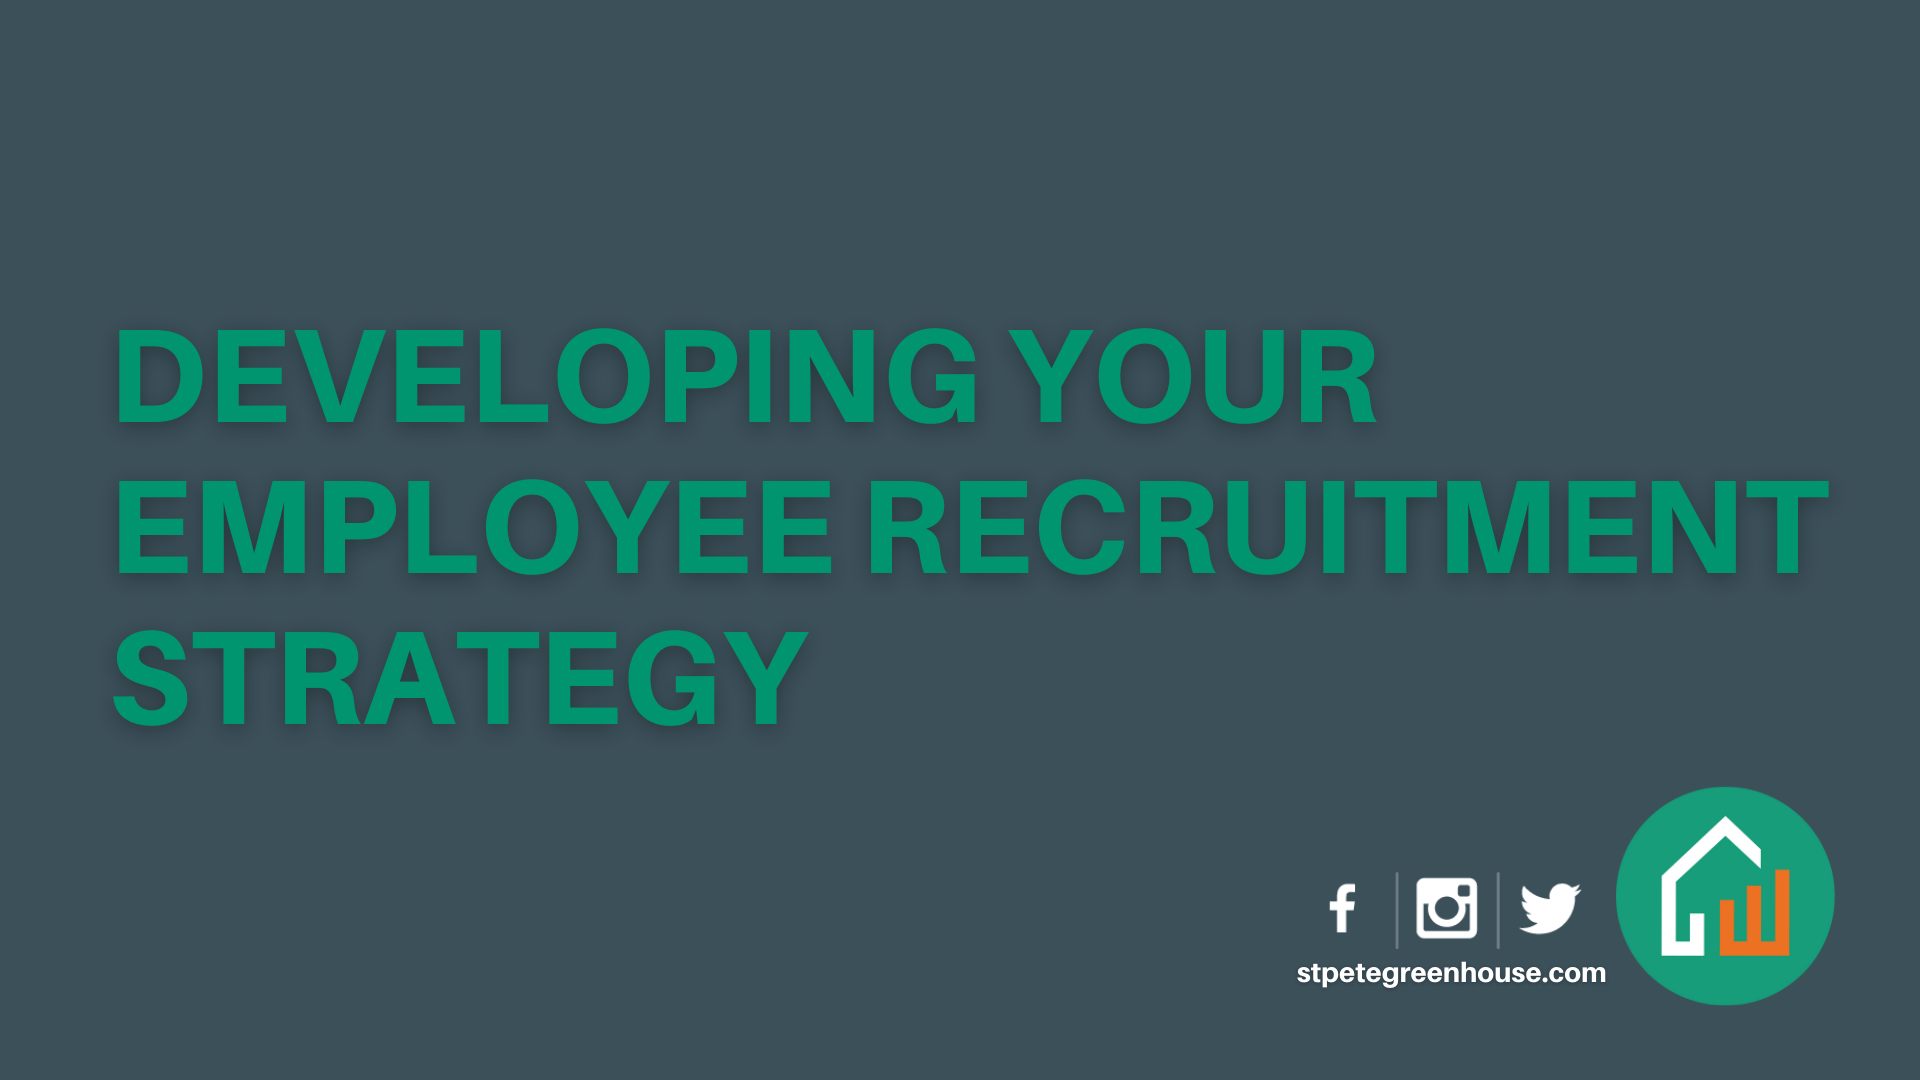 Developing an Employee Recruitment Strategy for Small Business-image